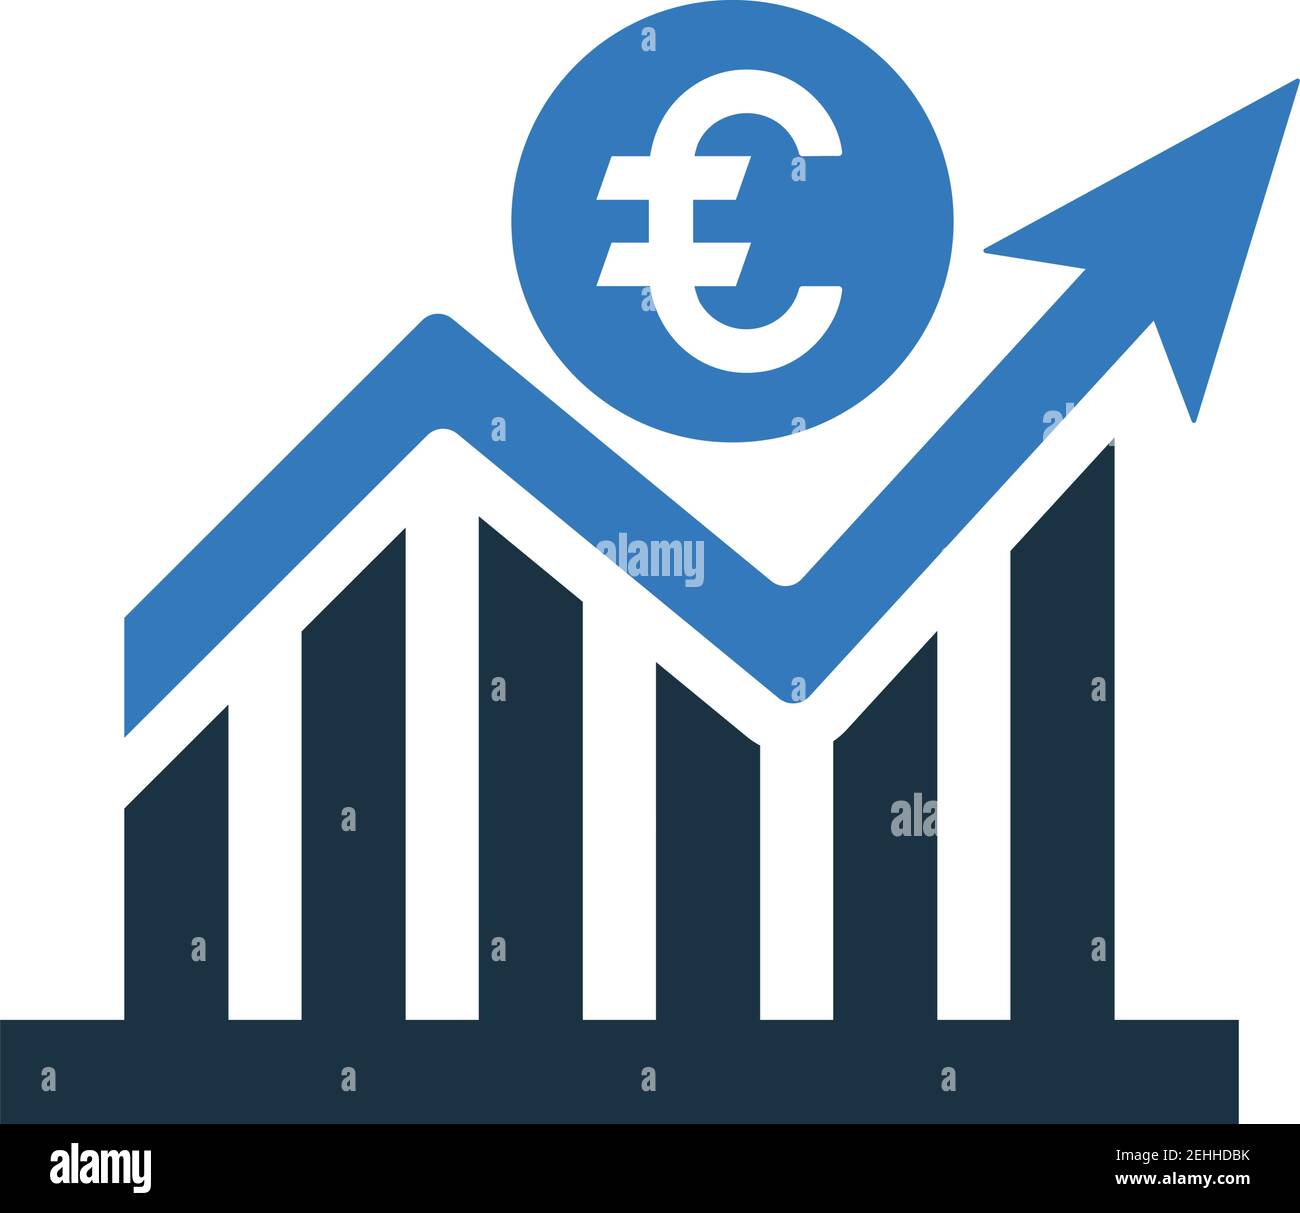 Euro bar chart financial report icon.. Beautiful design and fully editable vector for commercial, print media, web or any type of design projects. Stock Vector